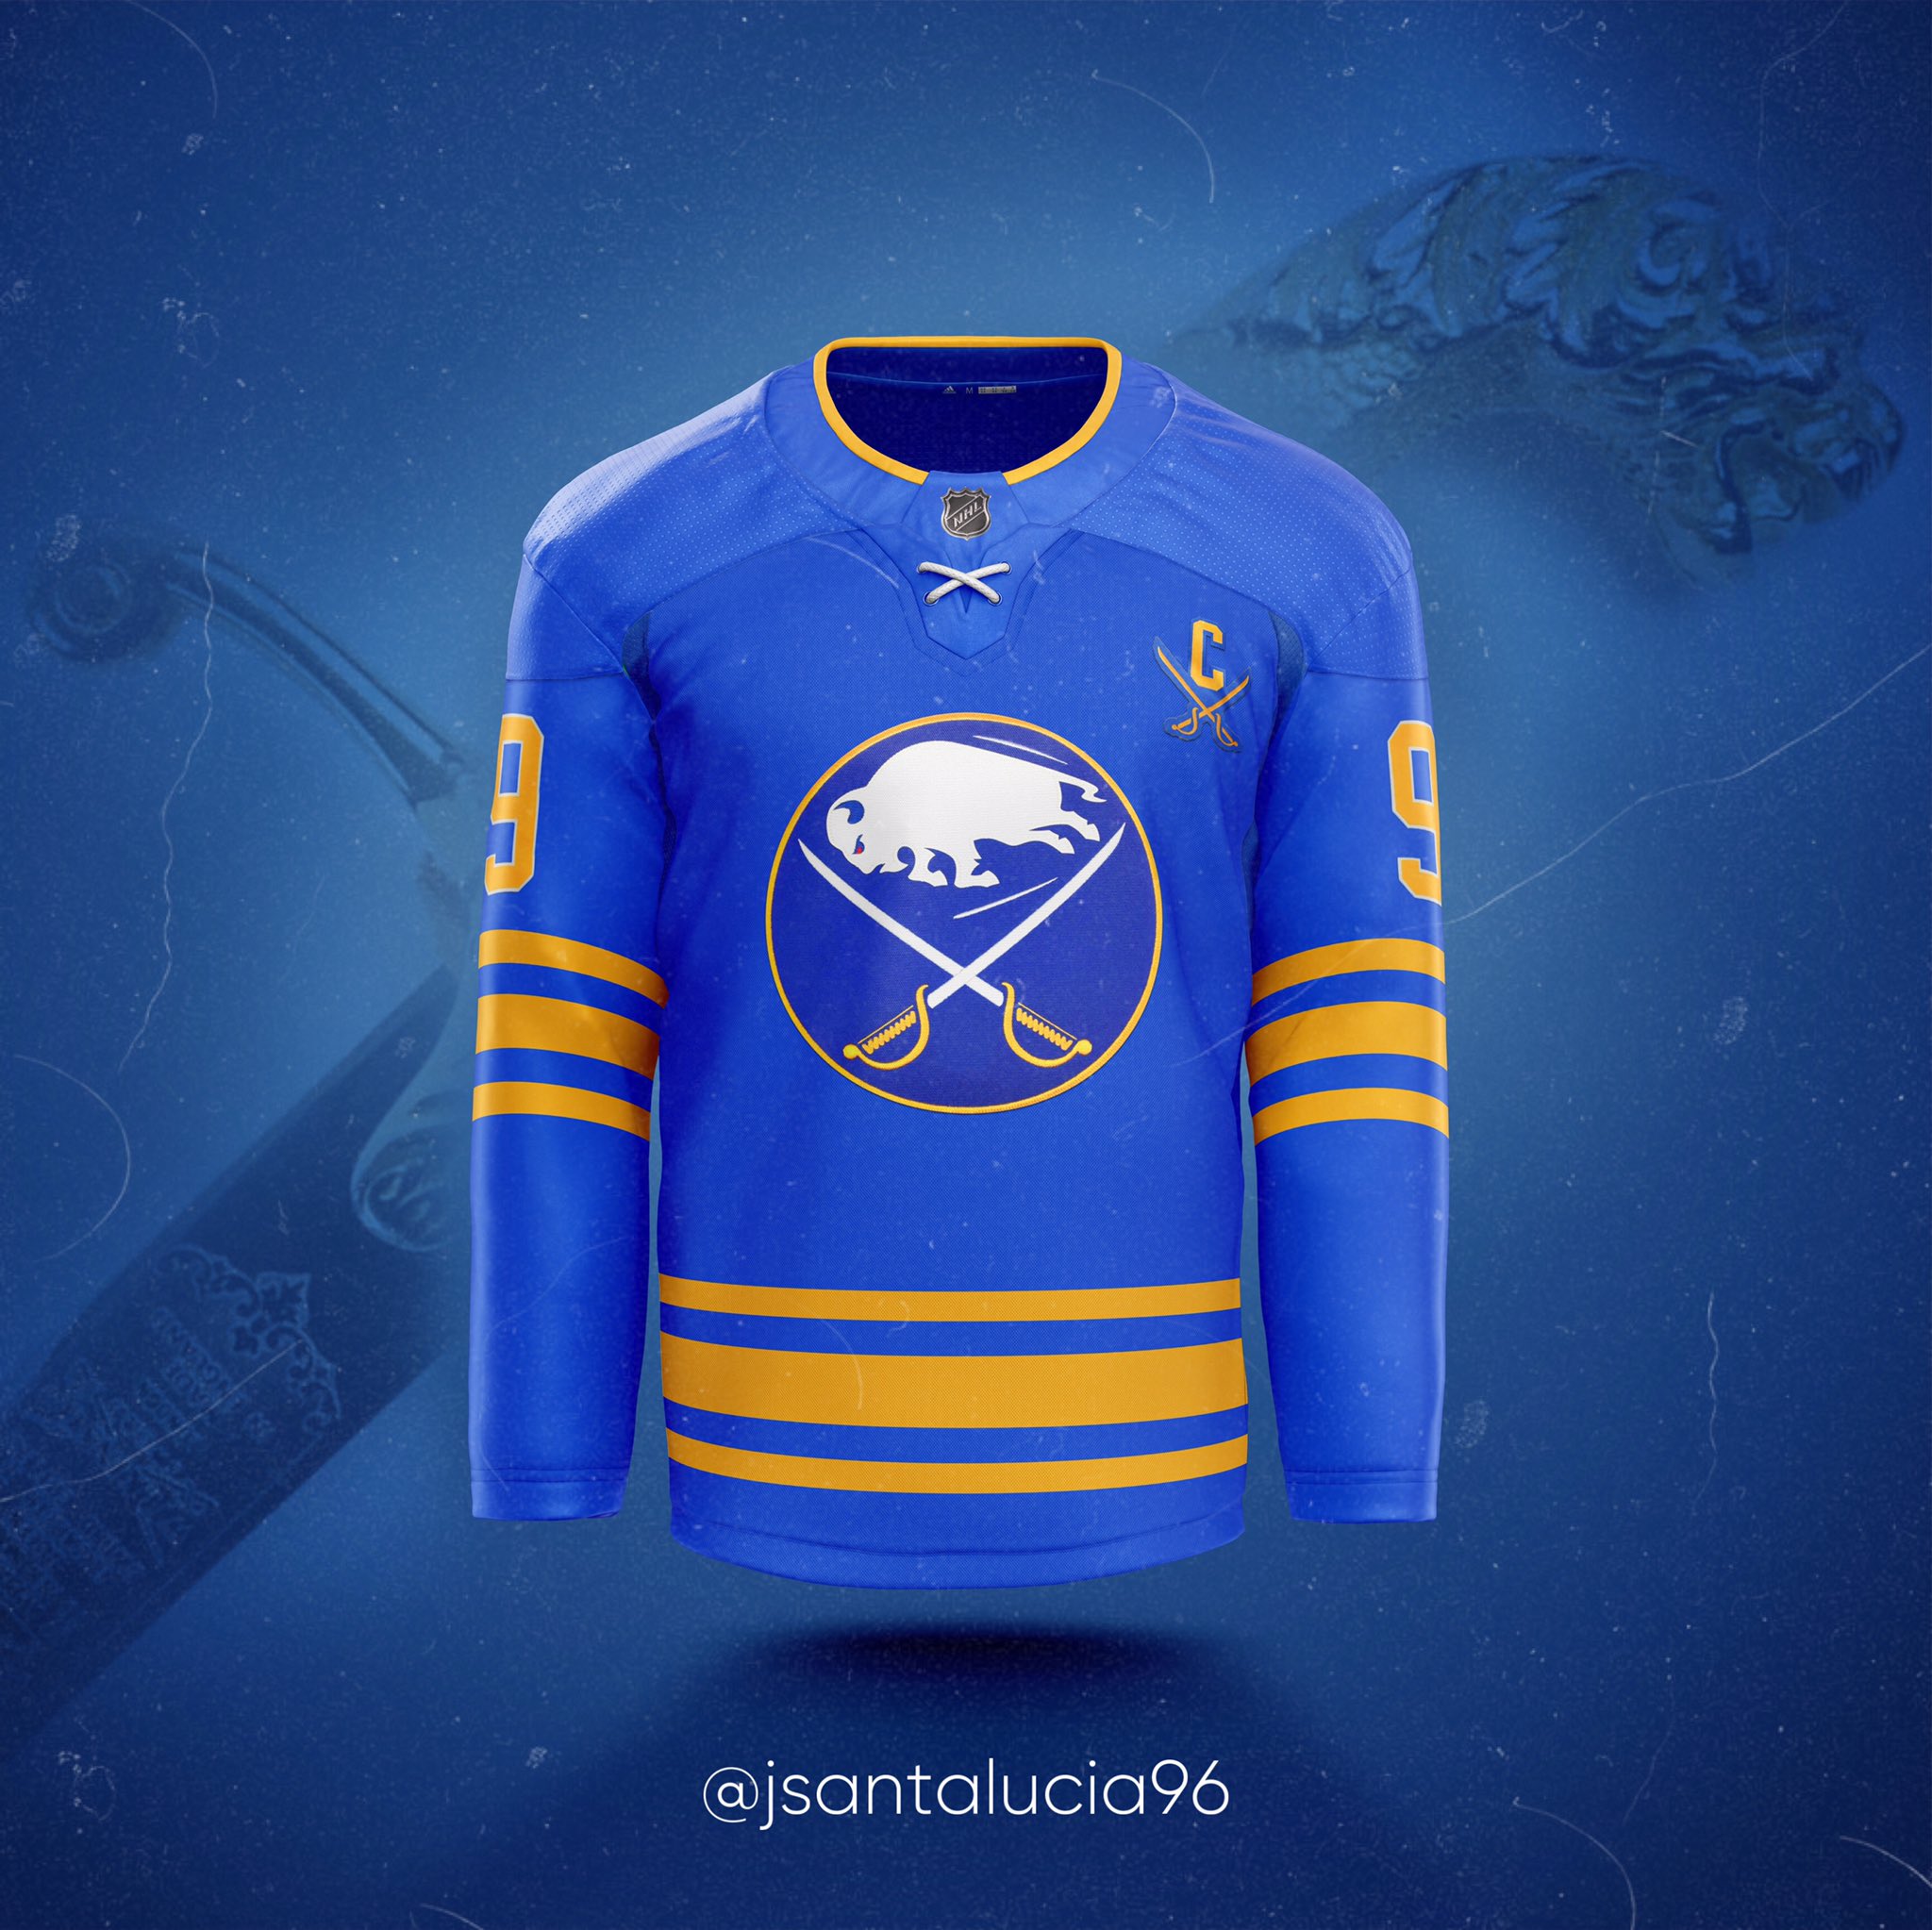 Buffalo Sabres jersey concepts inspired by their 50th anniversary